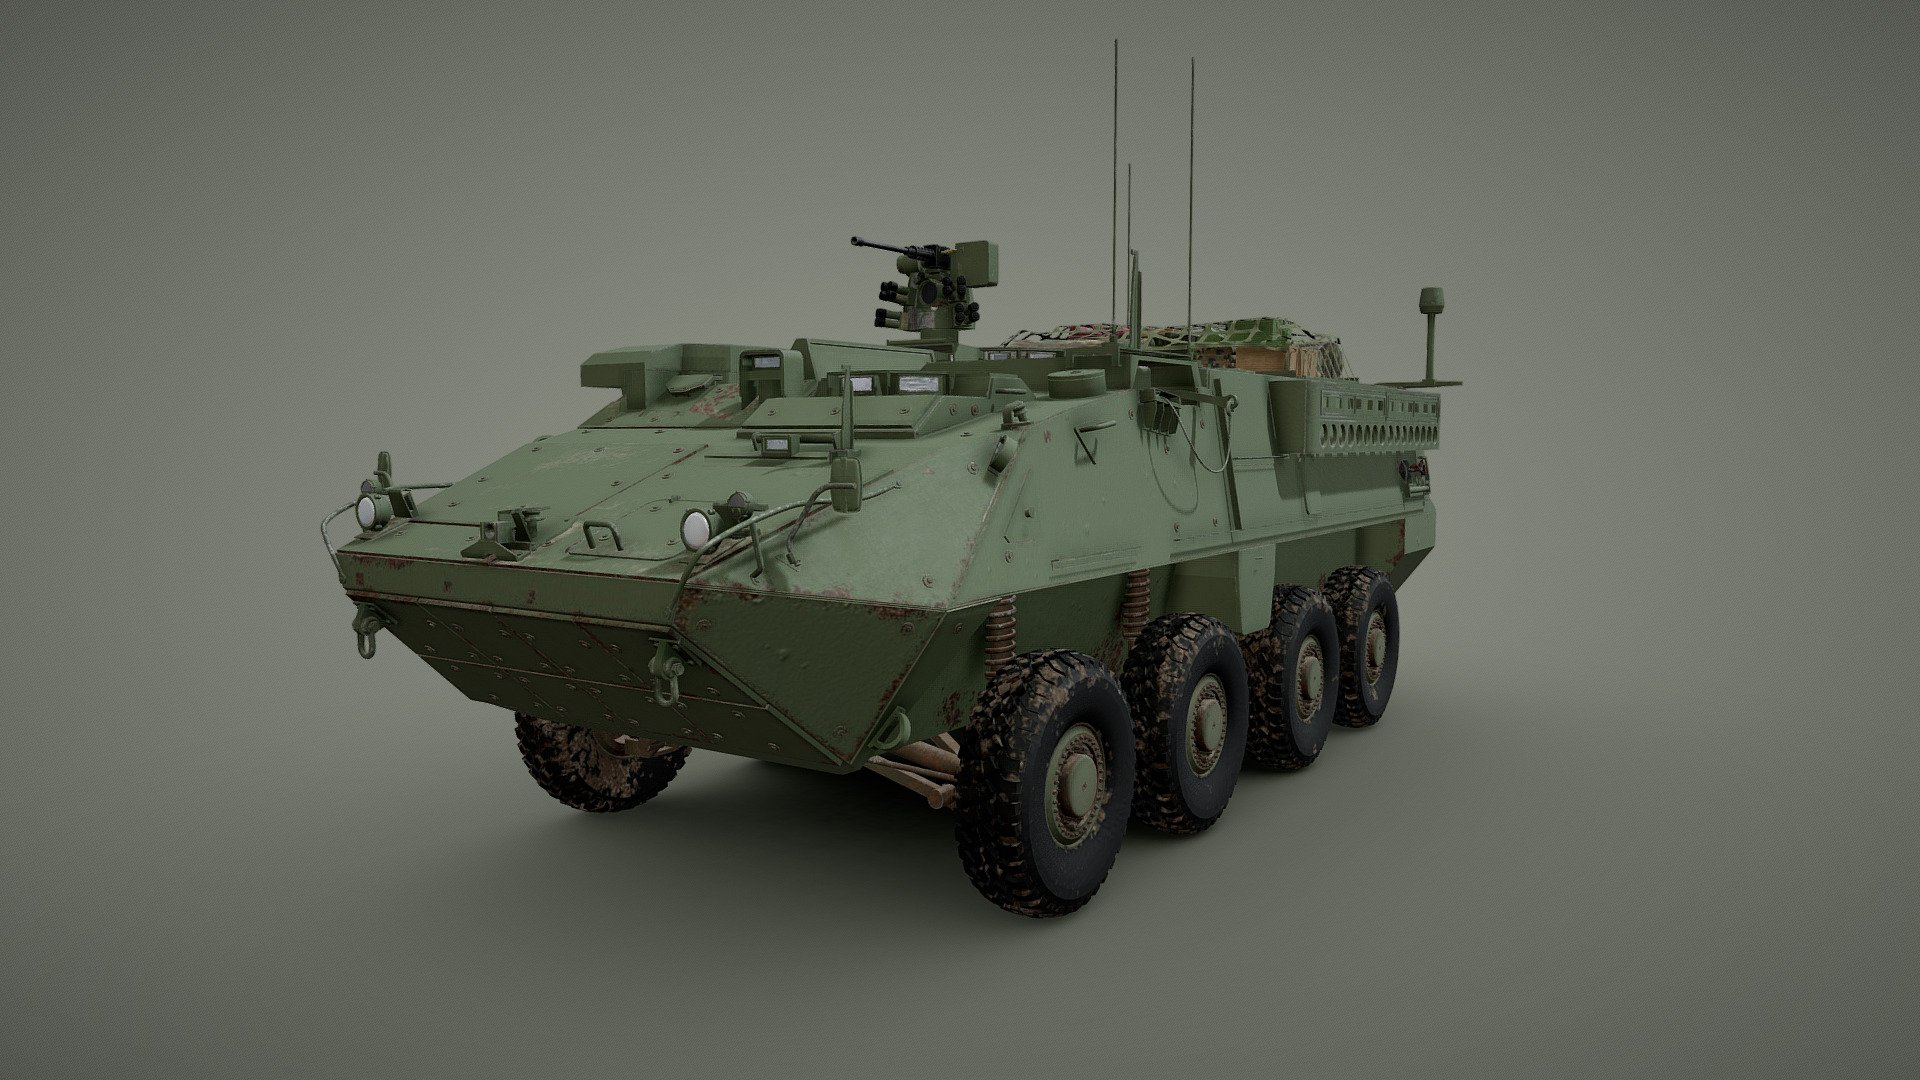 The Stryker is a family of eight-wheeled armored fighting vehicles derived from the Canadian LAV III. Stryker vehicles are produced by General Dynamics Land Systems-Canada (GDLS-C) for the United States Army in a plant in London, Ontario. It has four-wheel drive (8×4) and can be switched to all-wheel drive (8×8).

The Stryker was conceived as a family of vehicles forming the backbone of a new medium-weight brigade combat team (BCT) that was to strike a balance between heavy armor and infantry. The service launched Interim Armored Vehicle competition, and in 2000, the service selected the LAV III proposed by GDLS and General Motors Defense. The service named this family of vehicles the &ldquo;Stryker